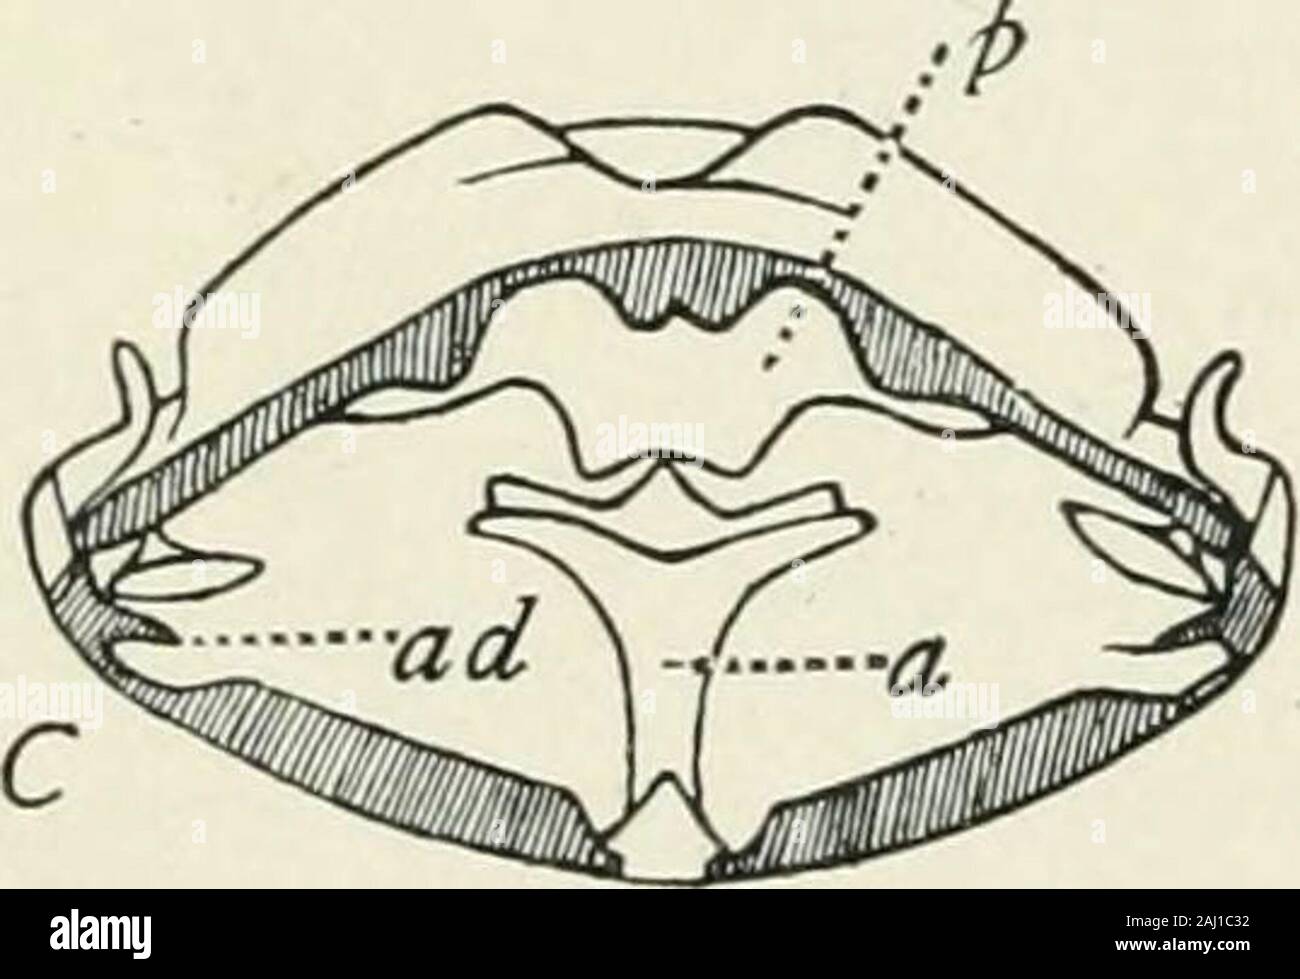 Entomology : with special reference to its biological and economic aspects . e of the internal organs.The tentorium of the head has al-ready been referred to. In thethorax three kinds of chitinous in-growths may be distinguished ac-cording to their positions : (i) phrag-mas, or dorsal projections; (2)apodemes, lateral; (3) apophyses,ventral. The phragmas (Fig. 59)are commonly three large plates,pertaining to the meso- and meta-thorax, and serving for the originof indirect muscles of flight inLepidoptera, Diptera, Hymenopteraand other strong-winged orders. Theapodemes are comparatively small in Stock Photo